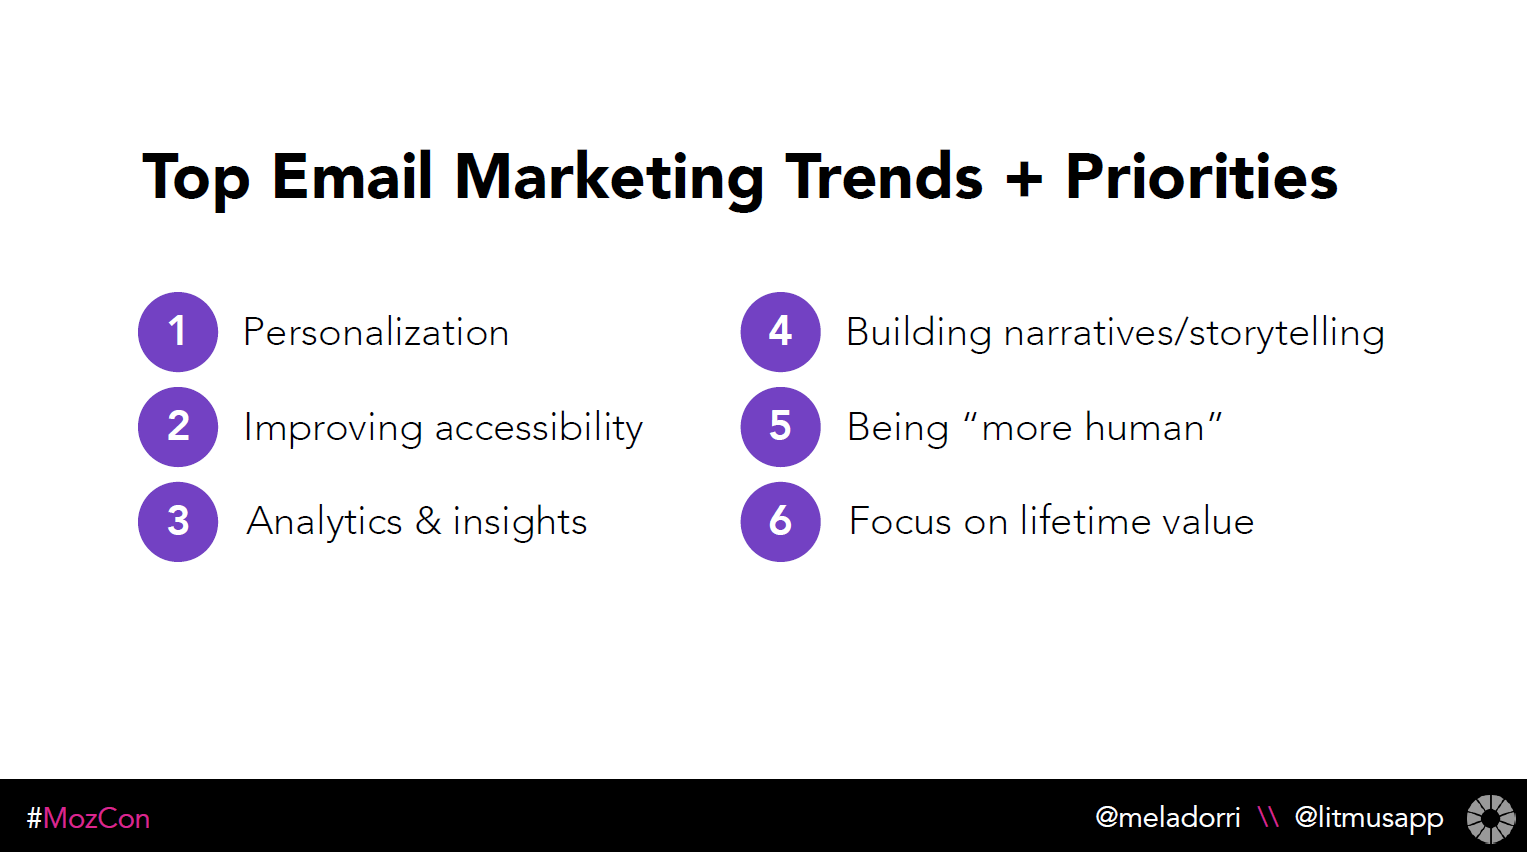 Top Email Marketing Trends and Priorities - Justine Jordan, MozCon 2018